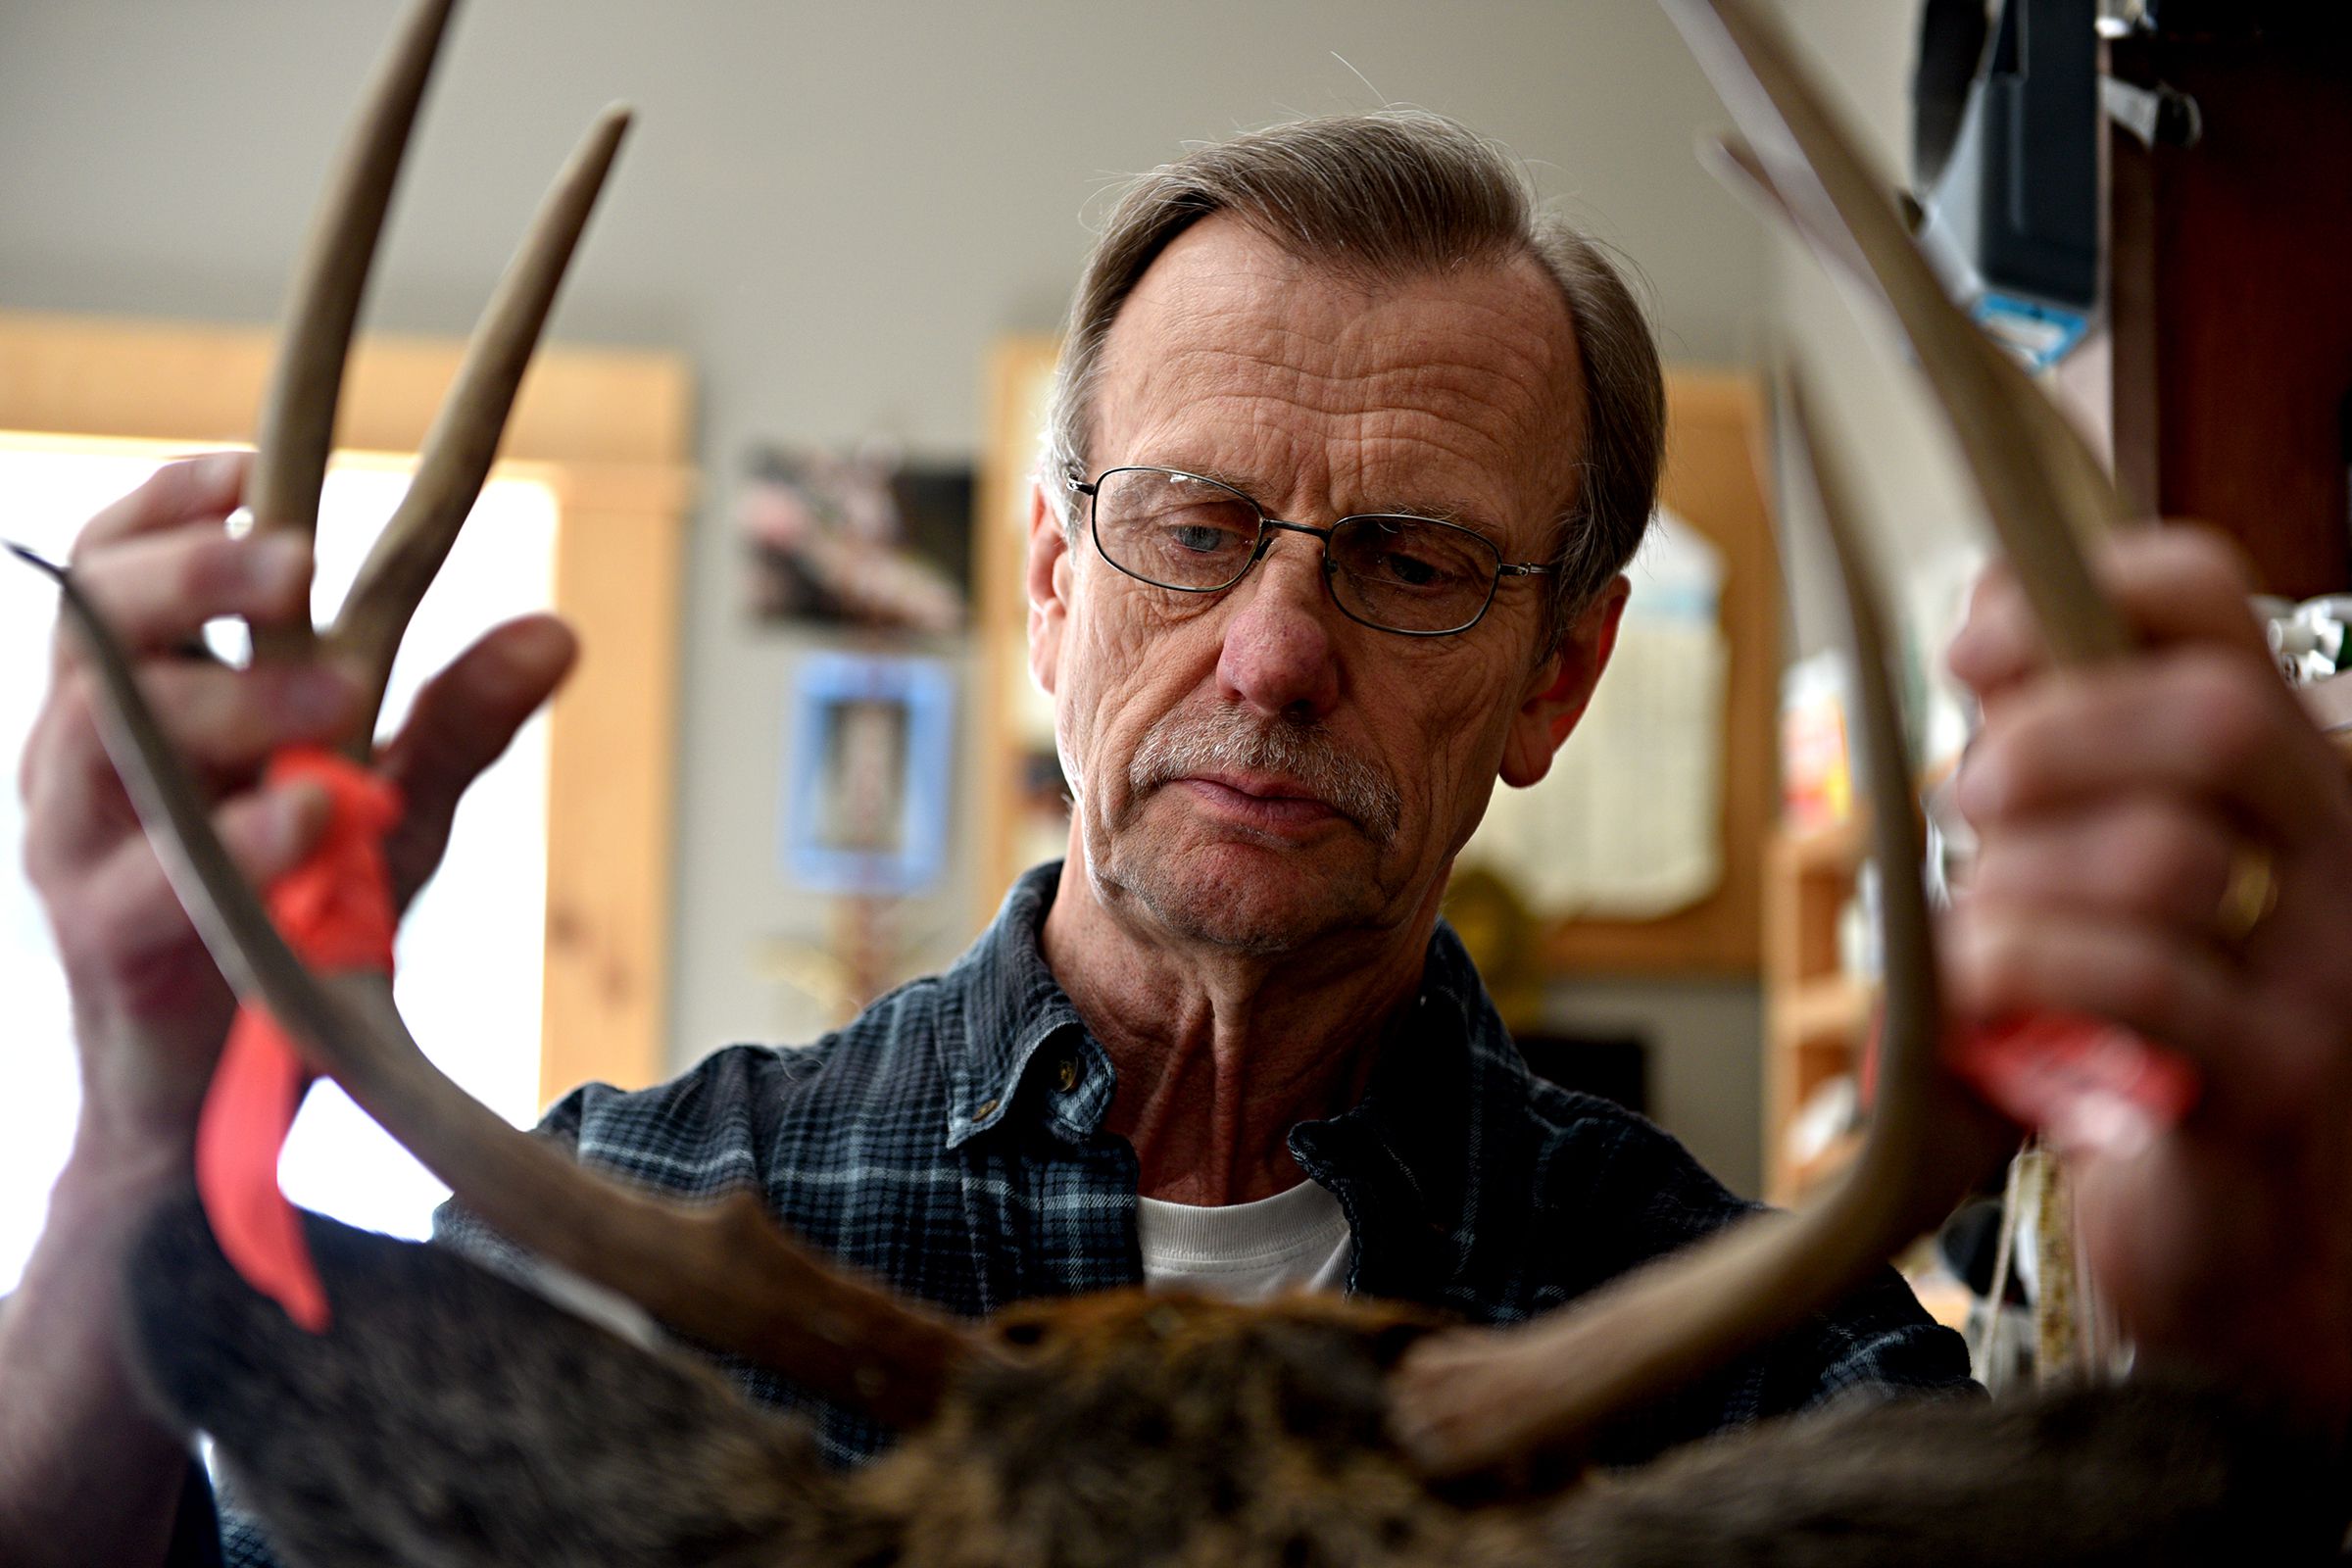 John Matyka owner of Jacobs Brook Taxidermy looks over the antlers of a buck he was working on at his shop in Orford, N.H., on Wednesday, April 3, 2019. (Valley News - Jennifer Hauck) Copyright Valley News. May not be reprinted or used online without permission. Send requests to permission@vnews.com.